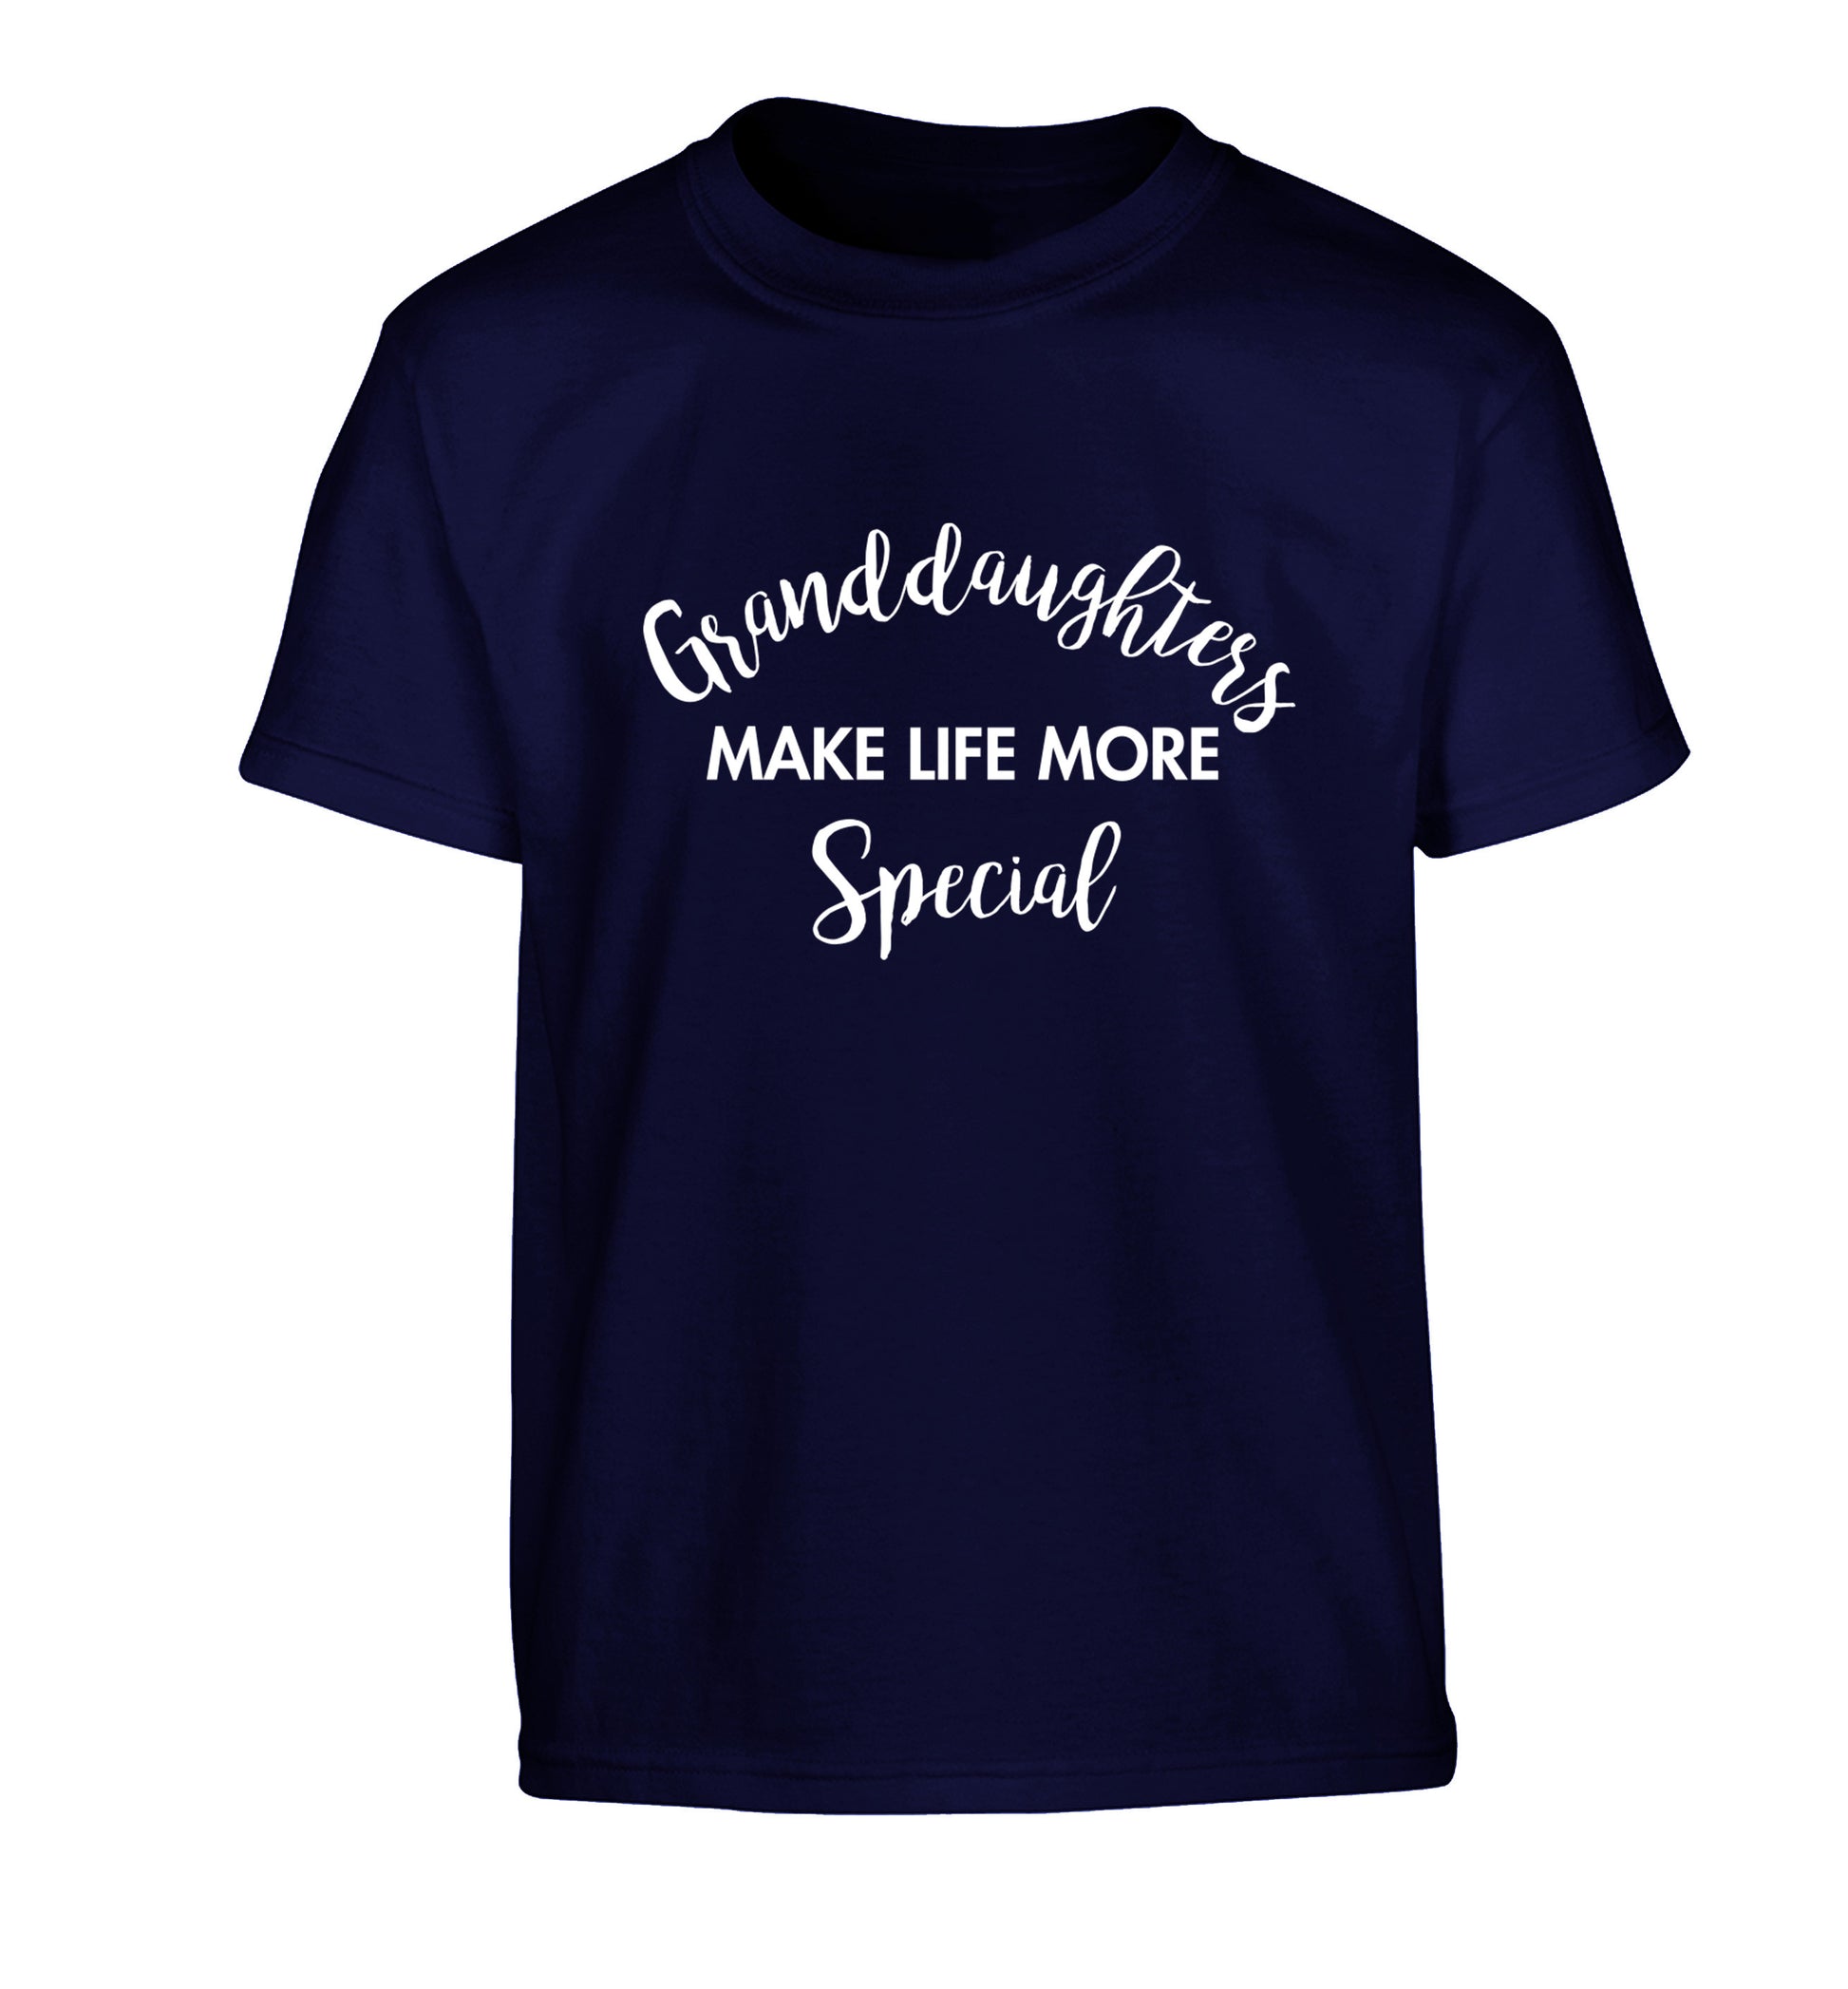 Granddaughters make life more special Children's navy Tshirt 12-14 Years